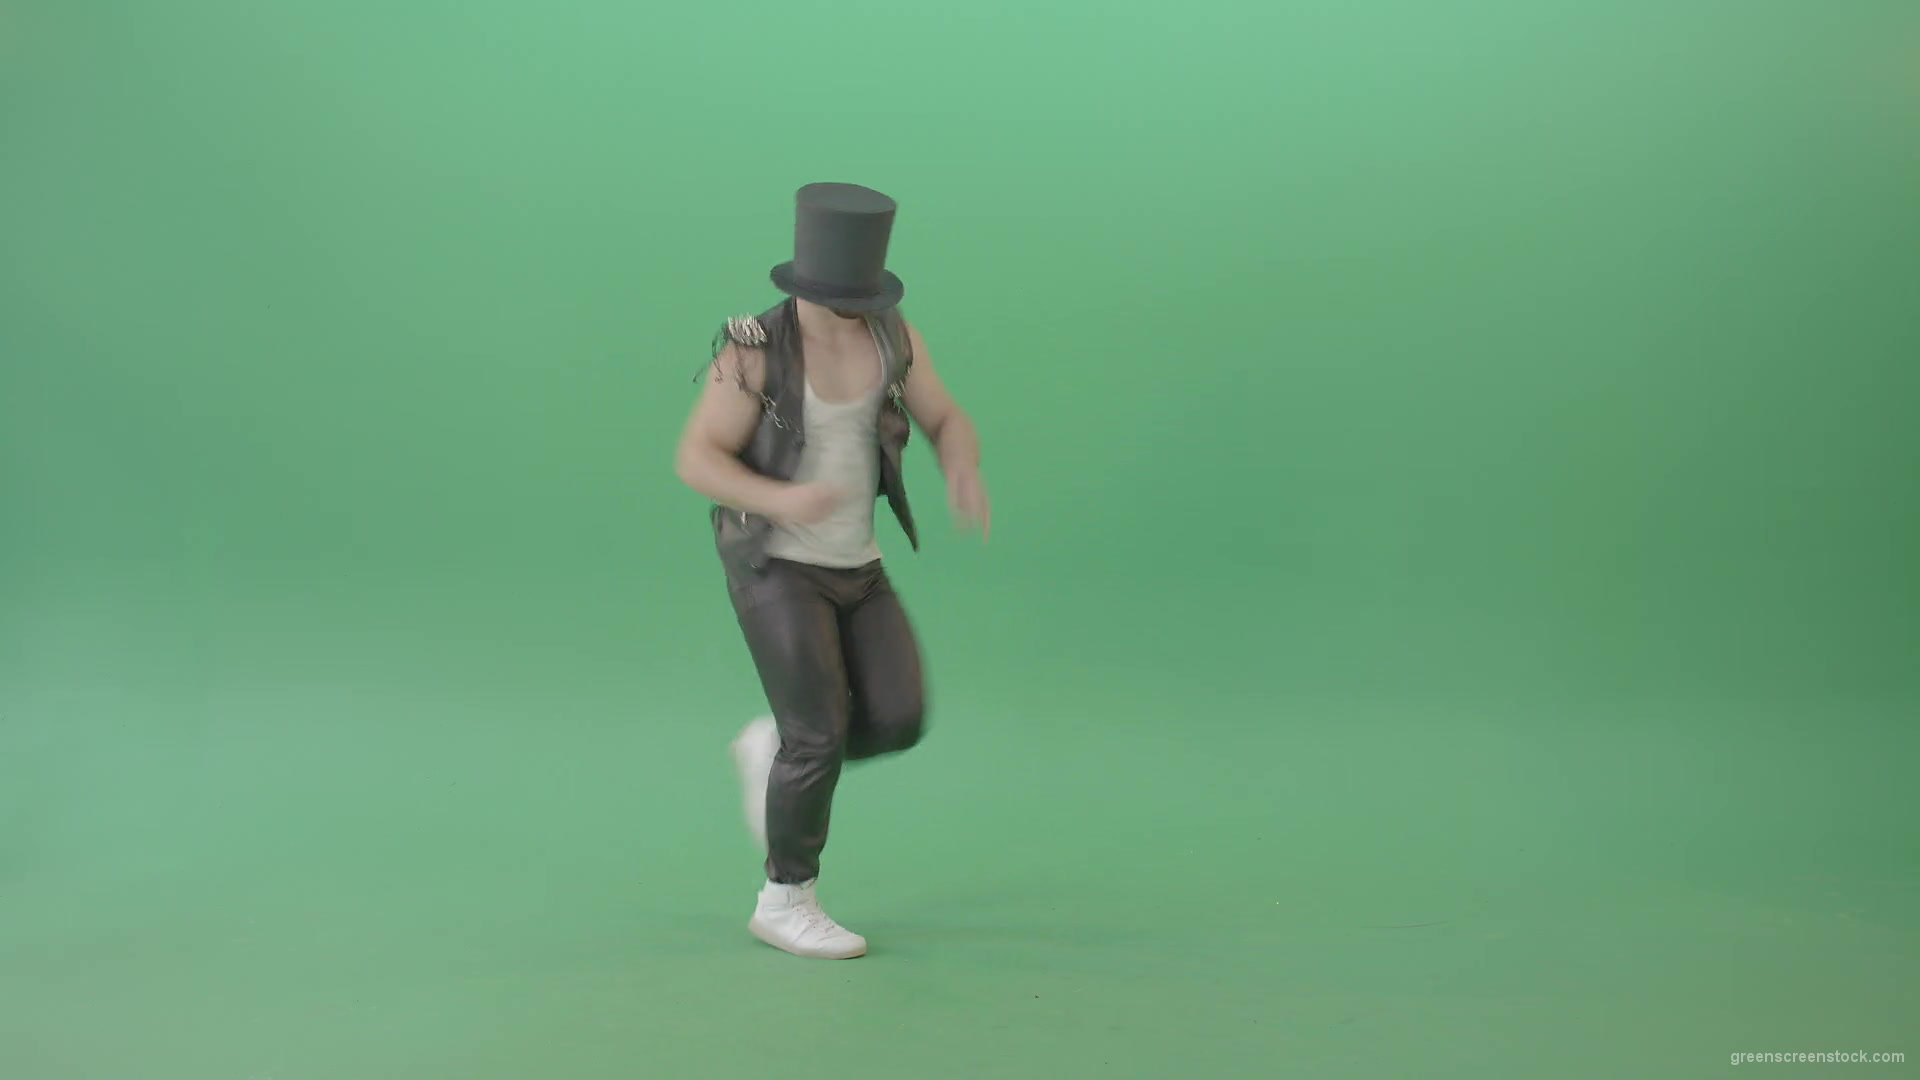 Funny-Man-in-Cylinder-Hat-and-black-fetish-costume-dancing-and-jumping-over-Green-Screen-4K-Video-Footage-1920_009 Green Screen Stock